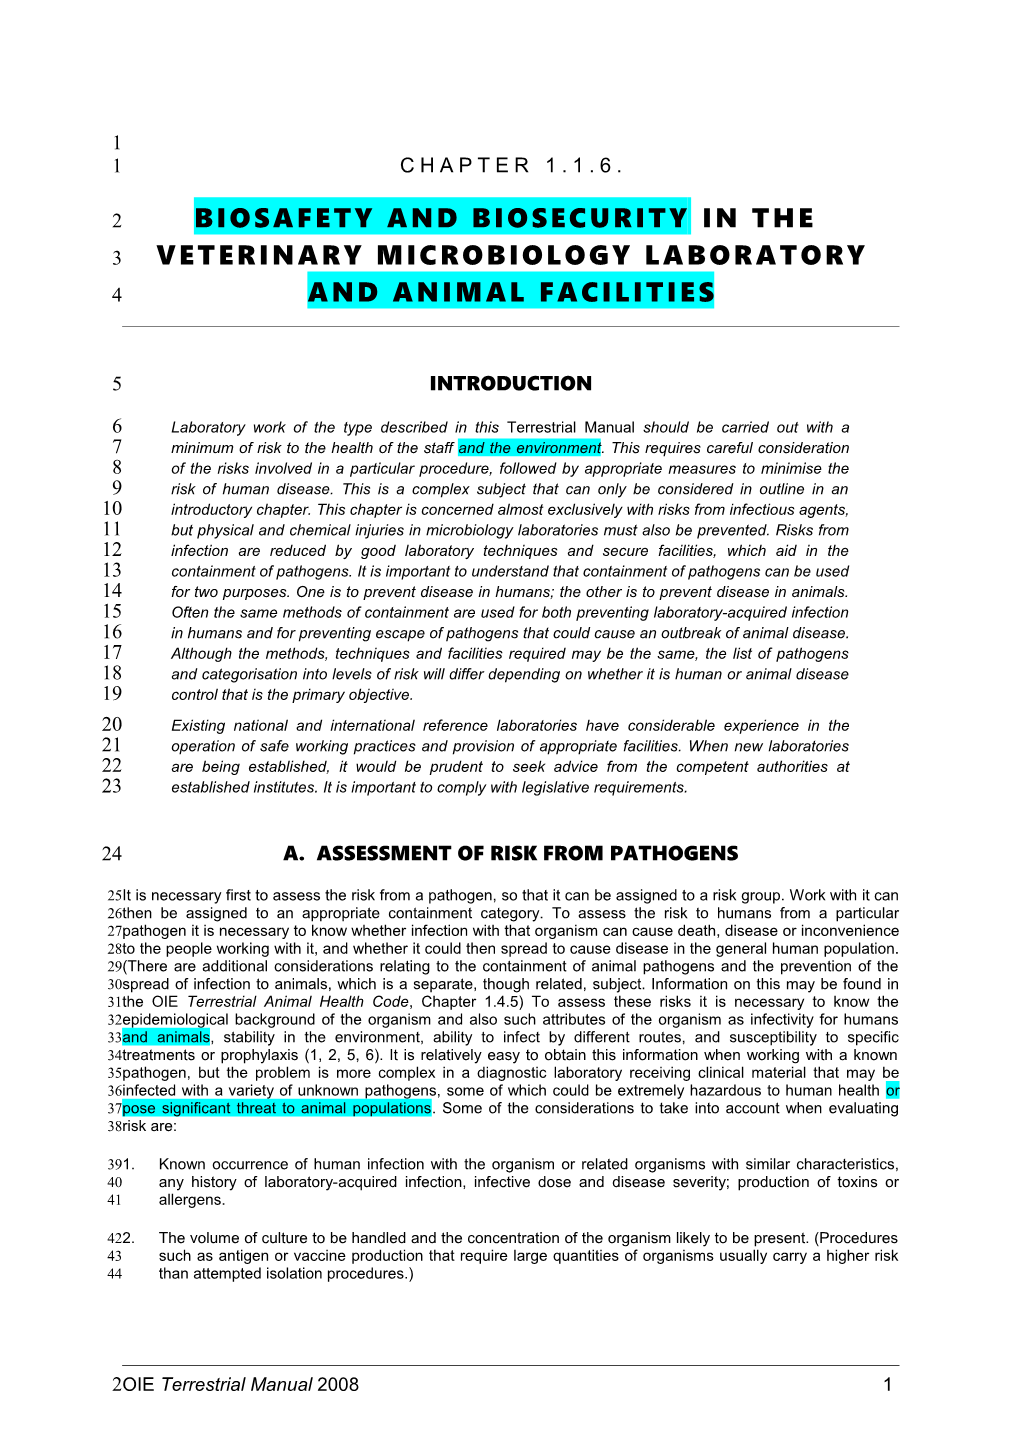 Chapter.1.6.1. Biosafety and Biosecurity in the Veterinary Microbiological Laboratory